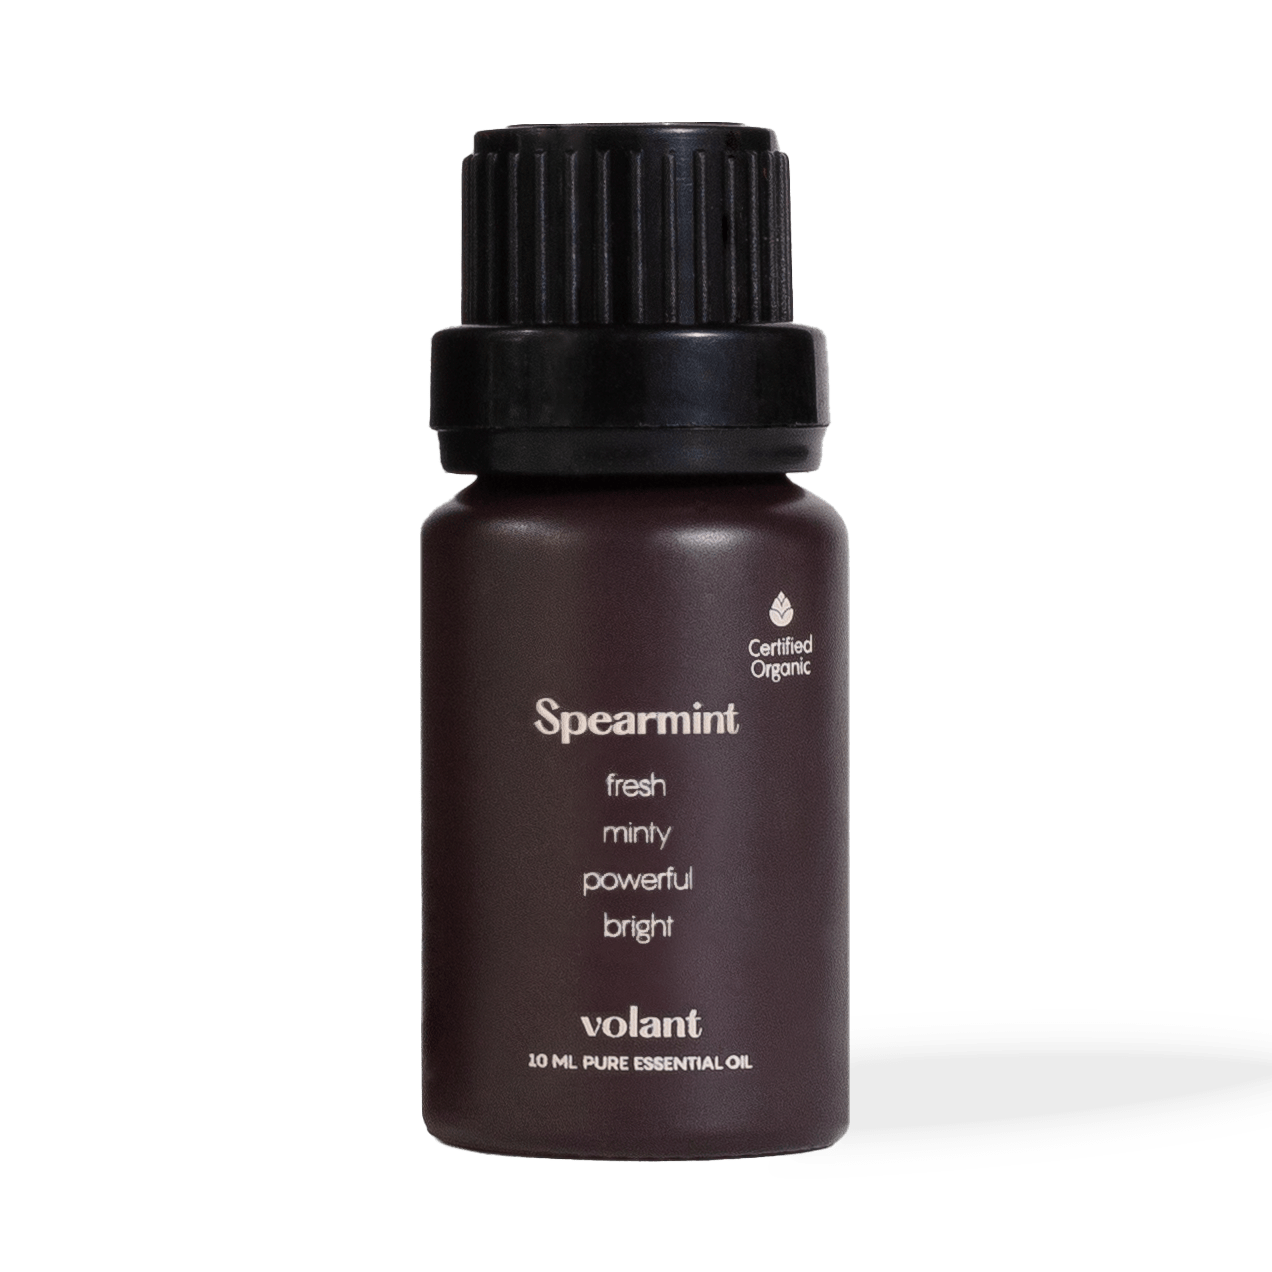 volant organic spearmint essential oil soothe ailments such as skin problems, headaches, nausea, vomiting, respiratory issues, and cold symptoms